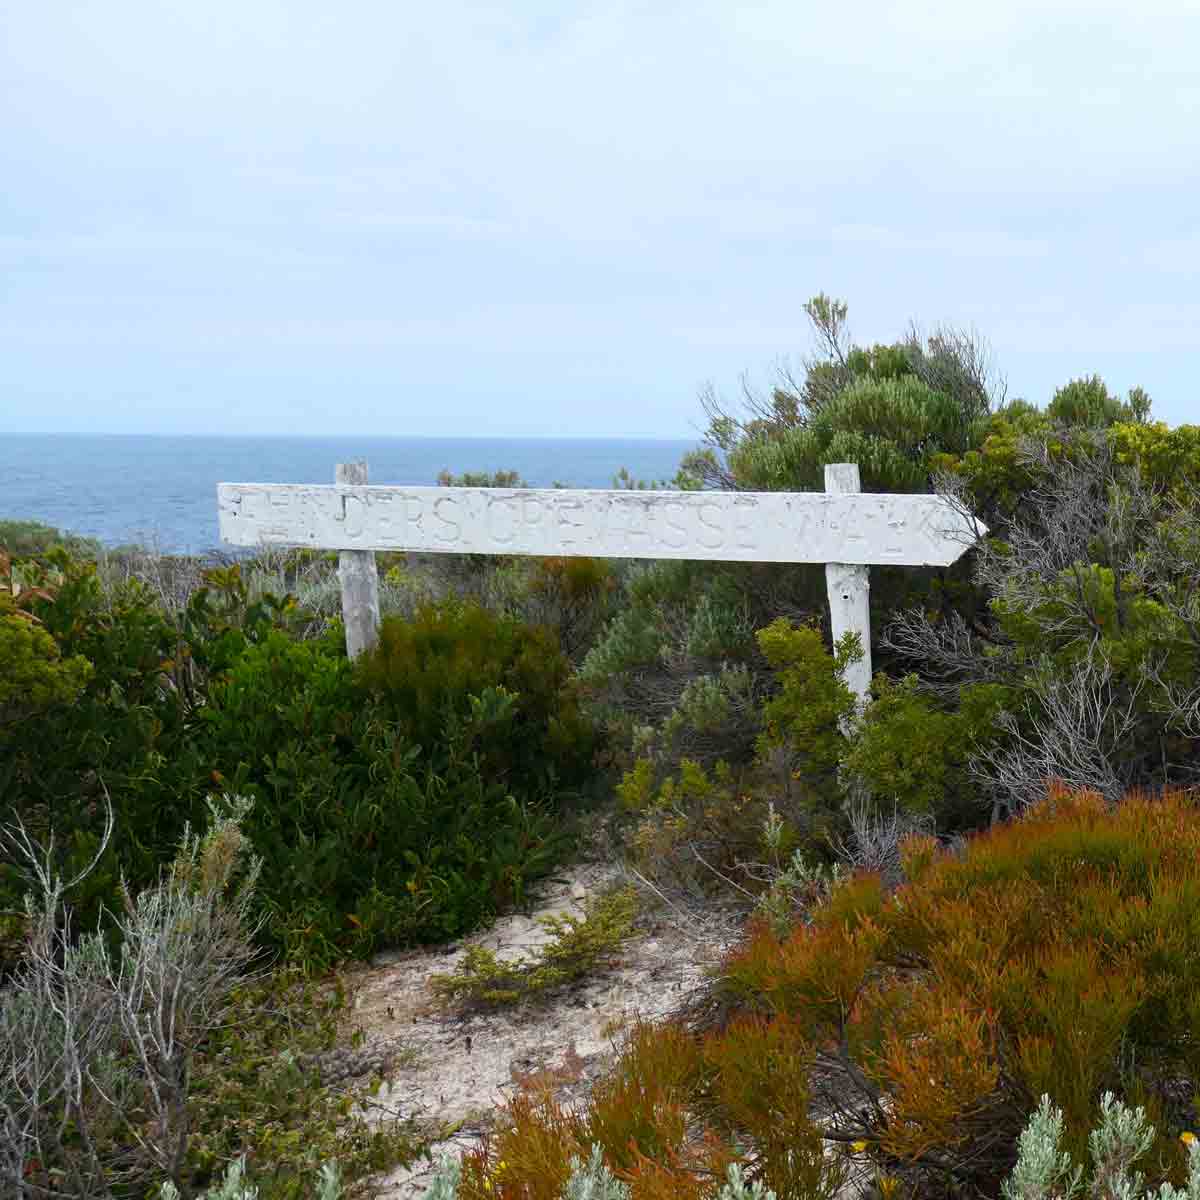 Faded sign for the Flinders Crevasse Walk. Located in Whaler's Way Sanctuary, Eyre Peninsula, South Australia.